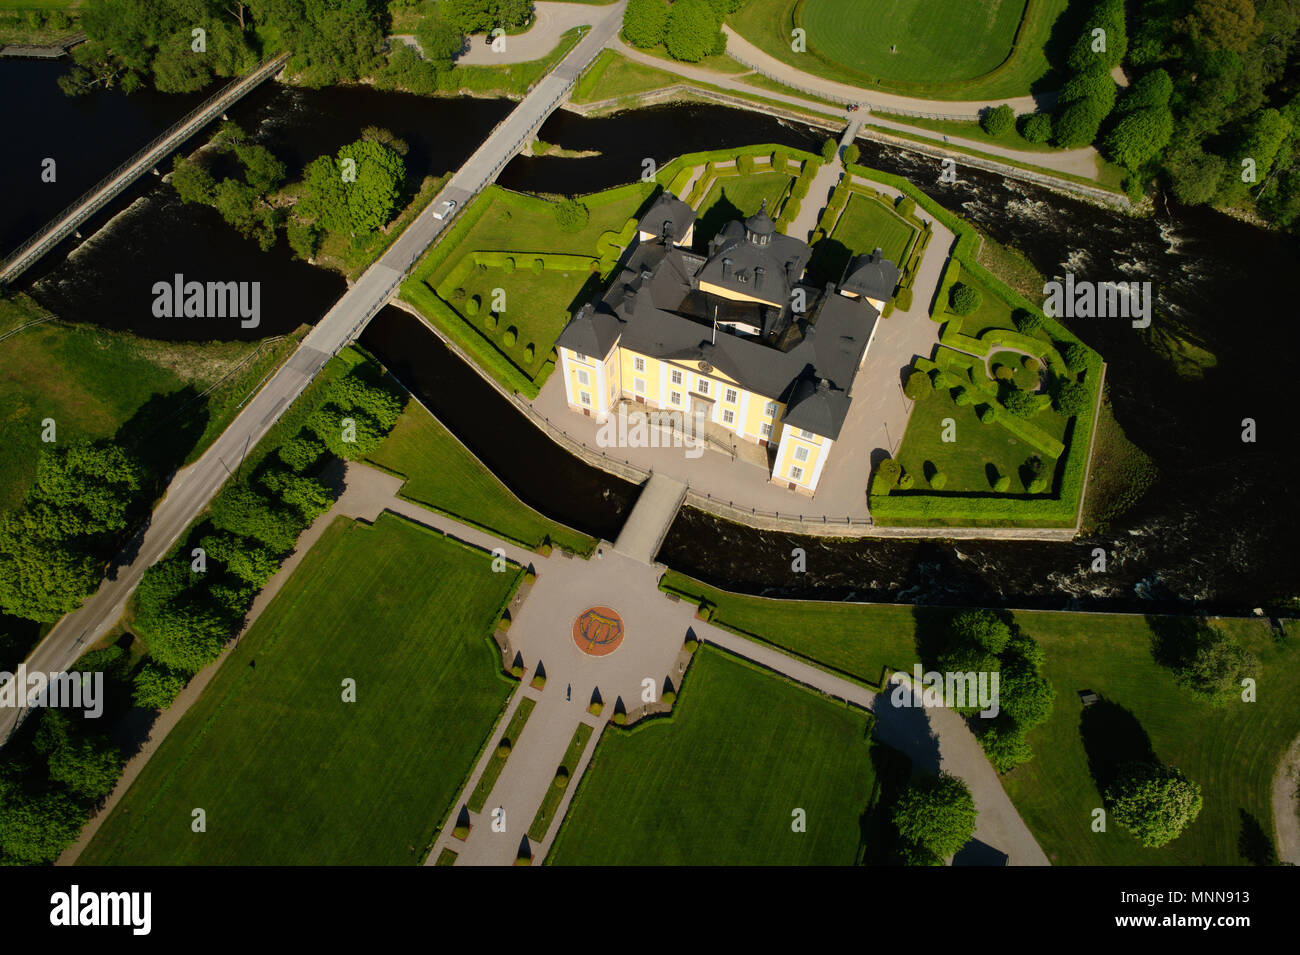 Aerial view of the Stromsholm palace located in Swedish province of Vastmanland. Stock Photo